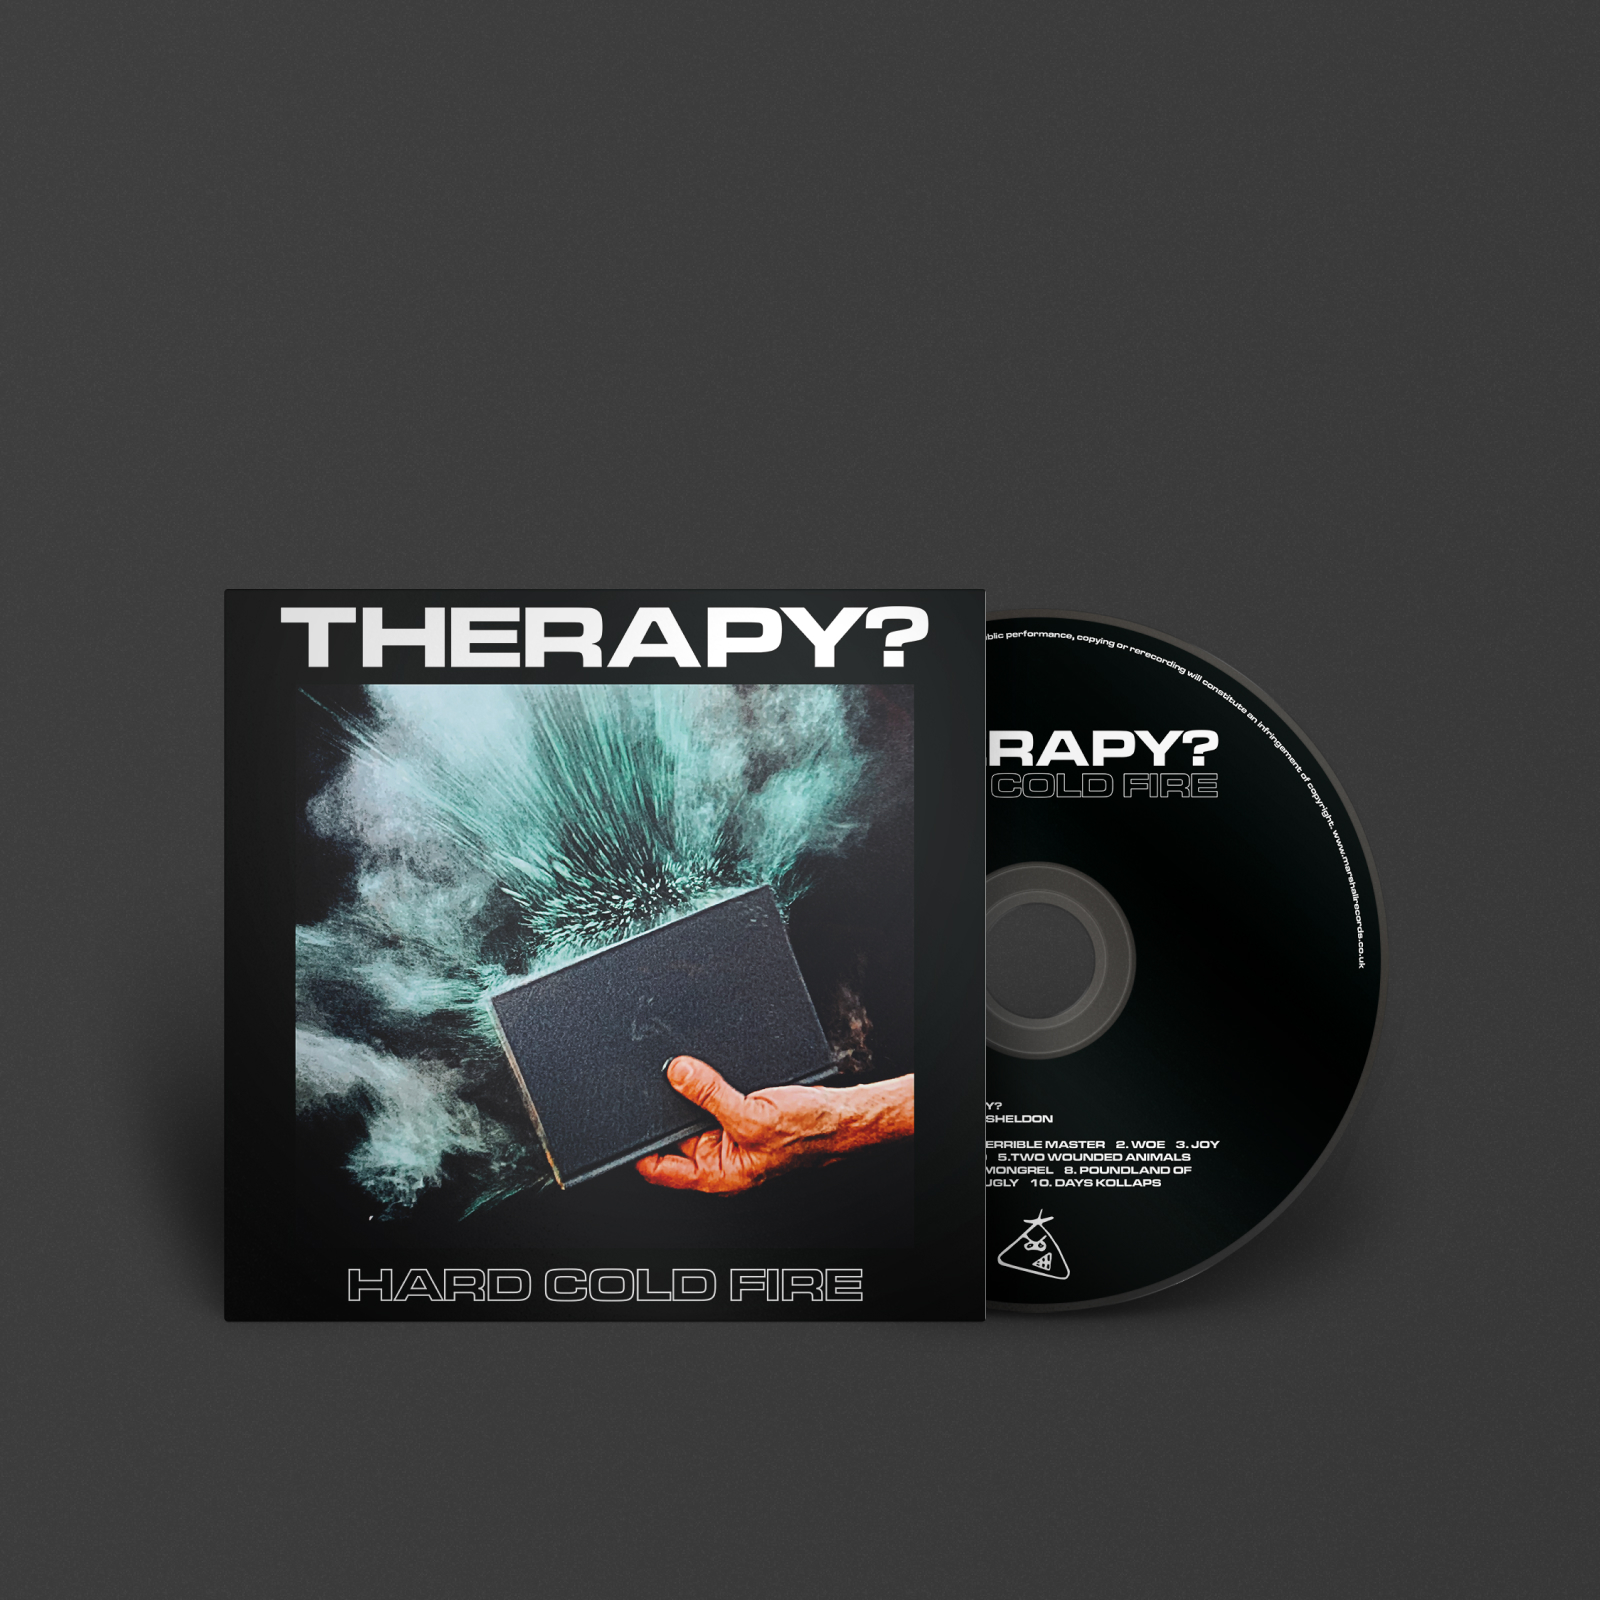 CD "Hard Cold Fire" der Band "Therapy?